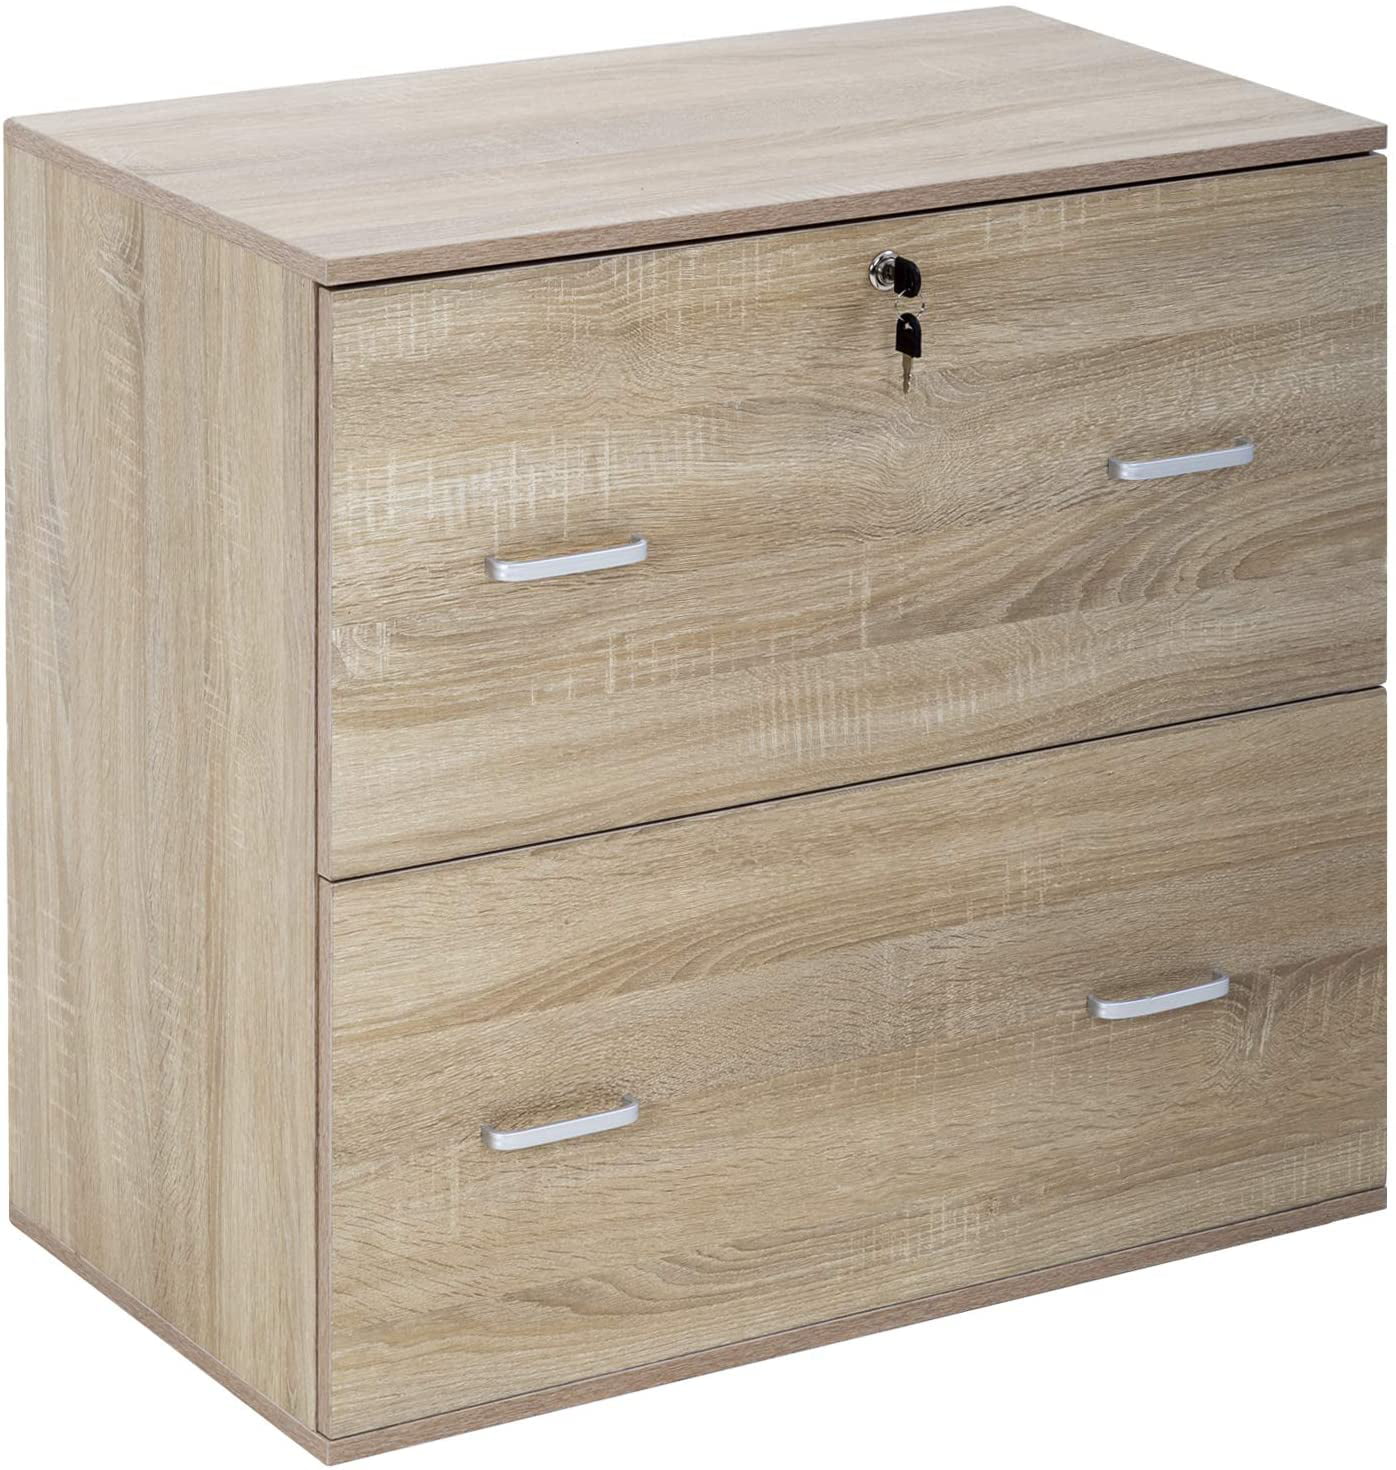 Wood File Cabinet Filing Cabinet With 2-Drawer Fits A4 or Letter Size ...